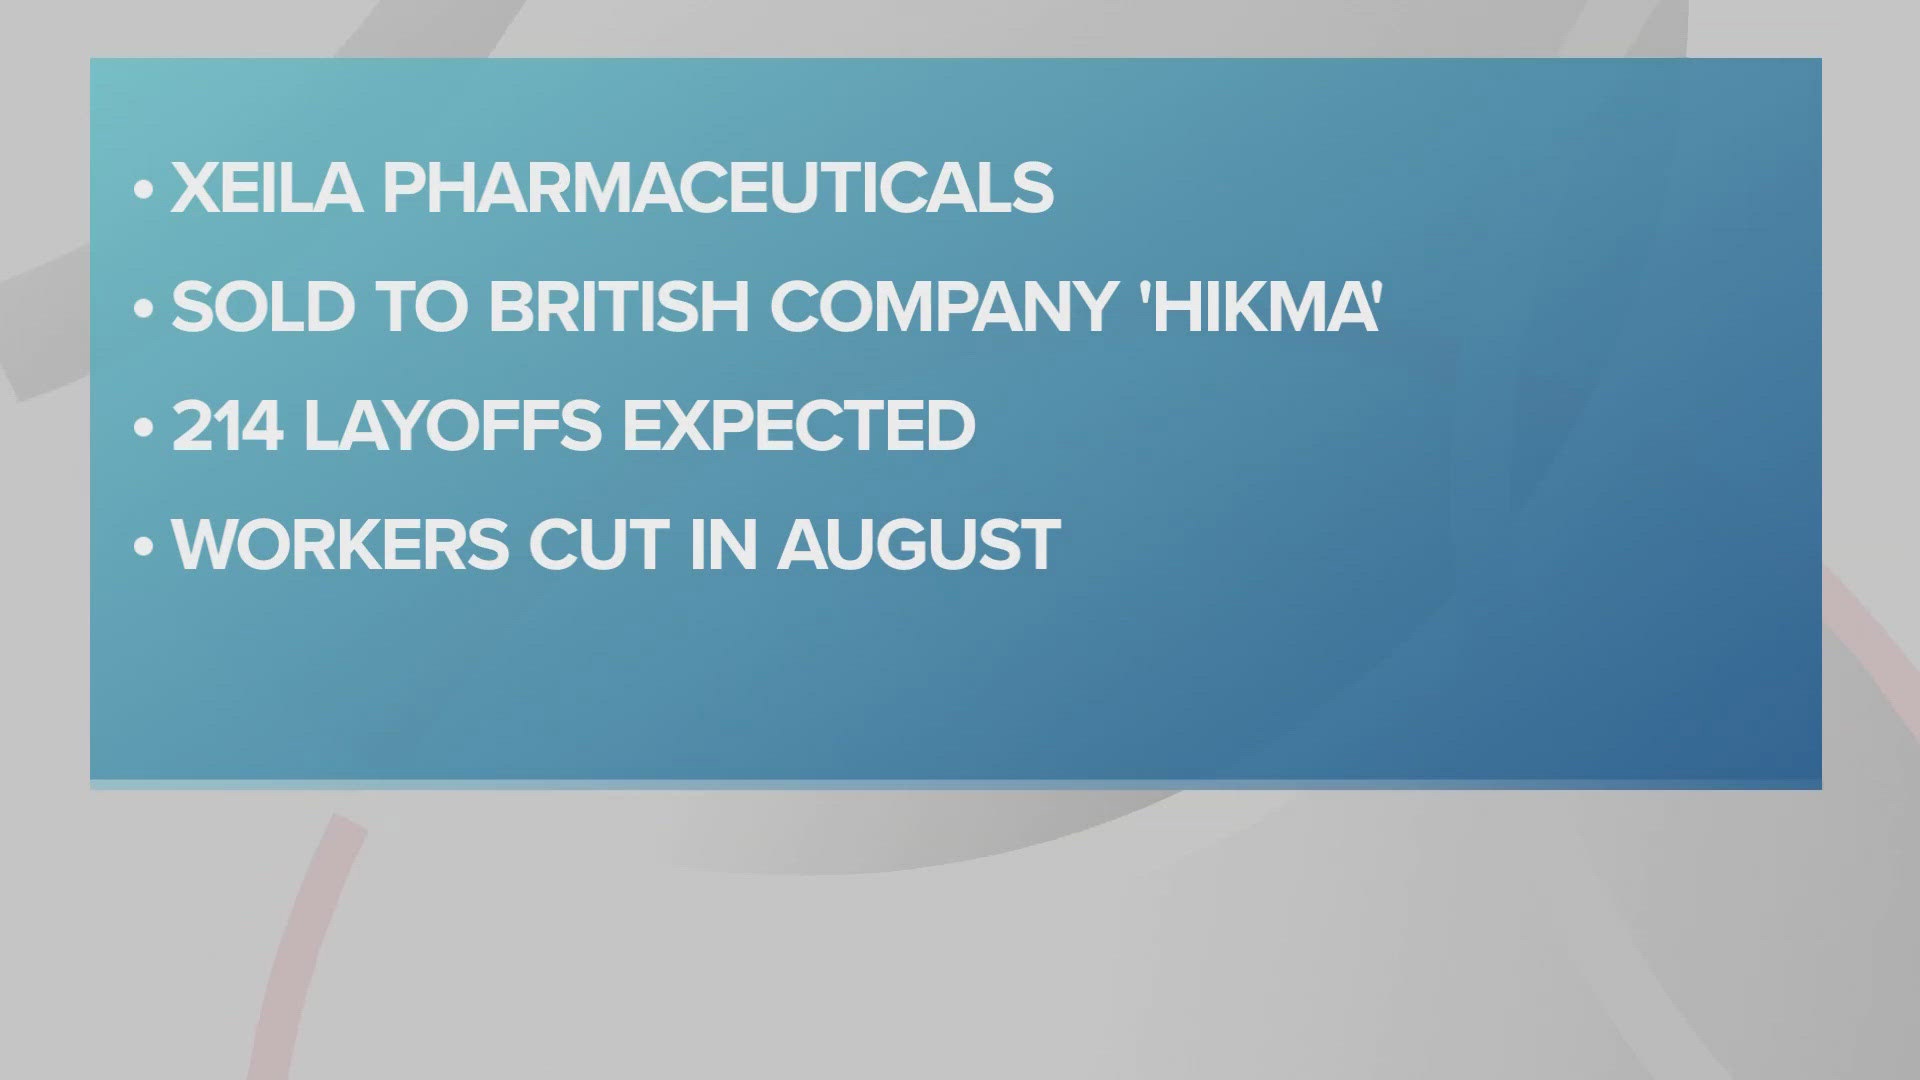 British-based Hikma Pharmaceuticals recently acquired the Bedford plant from Danish multinational Xellia Pharmaceuticals.